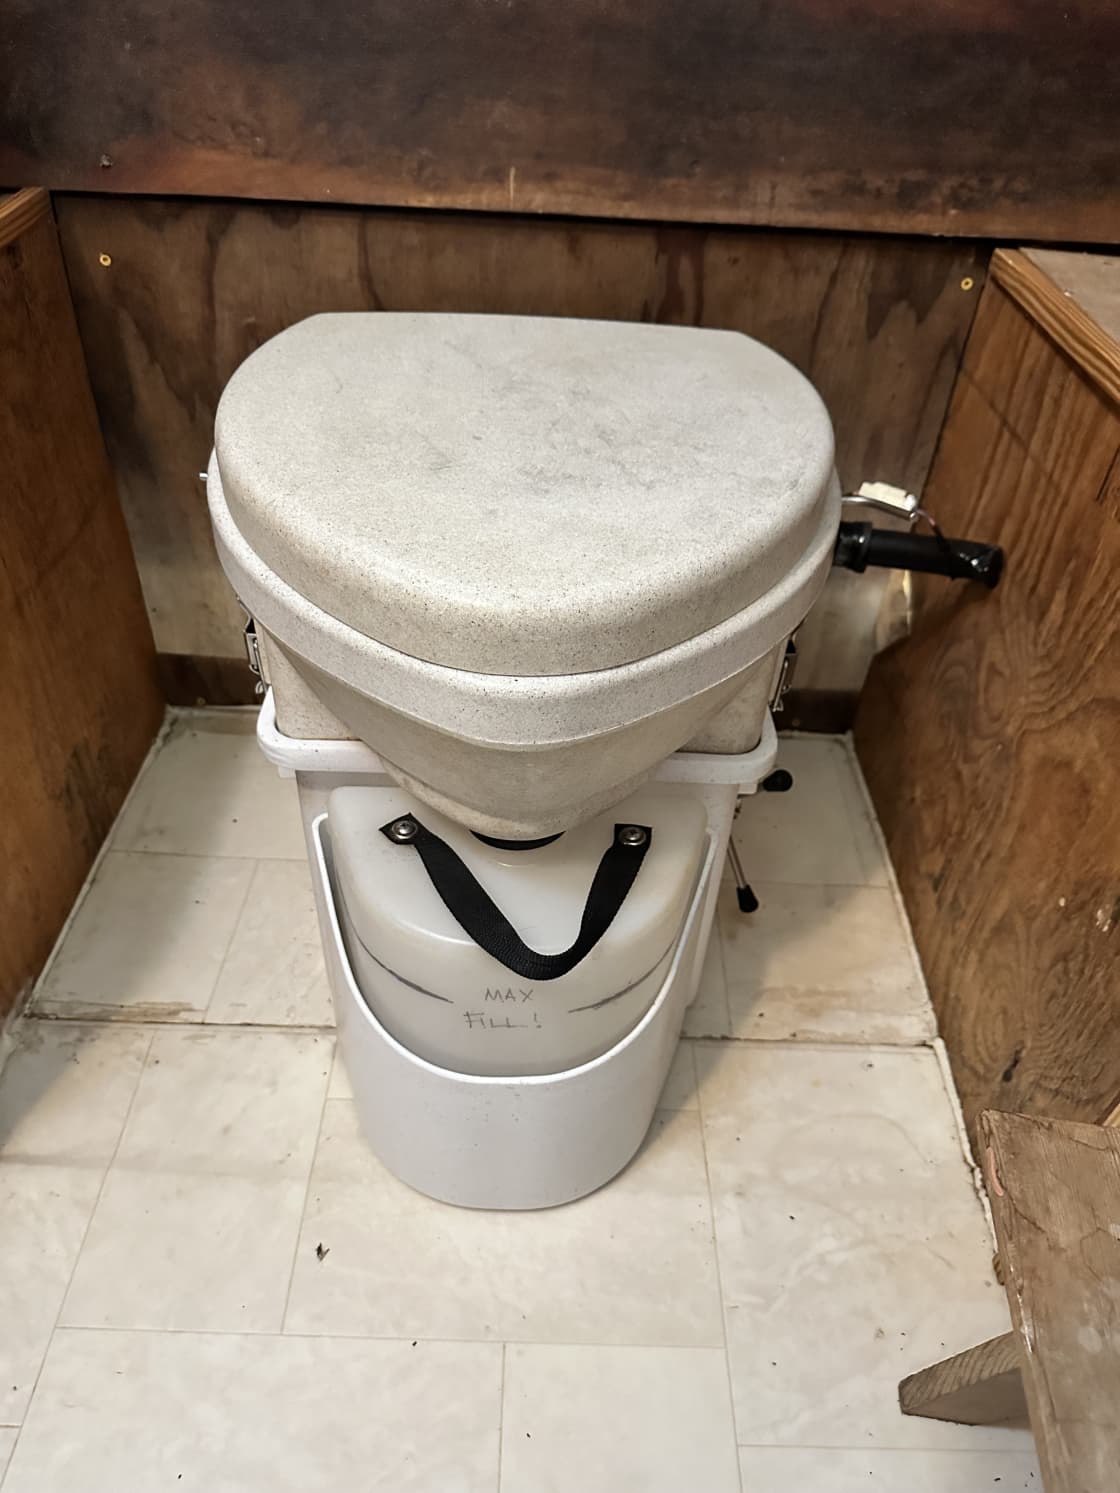 Natures Head composting toilet